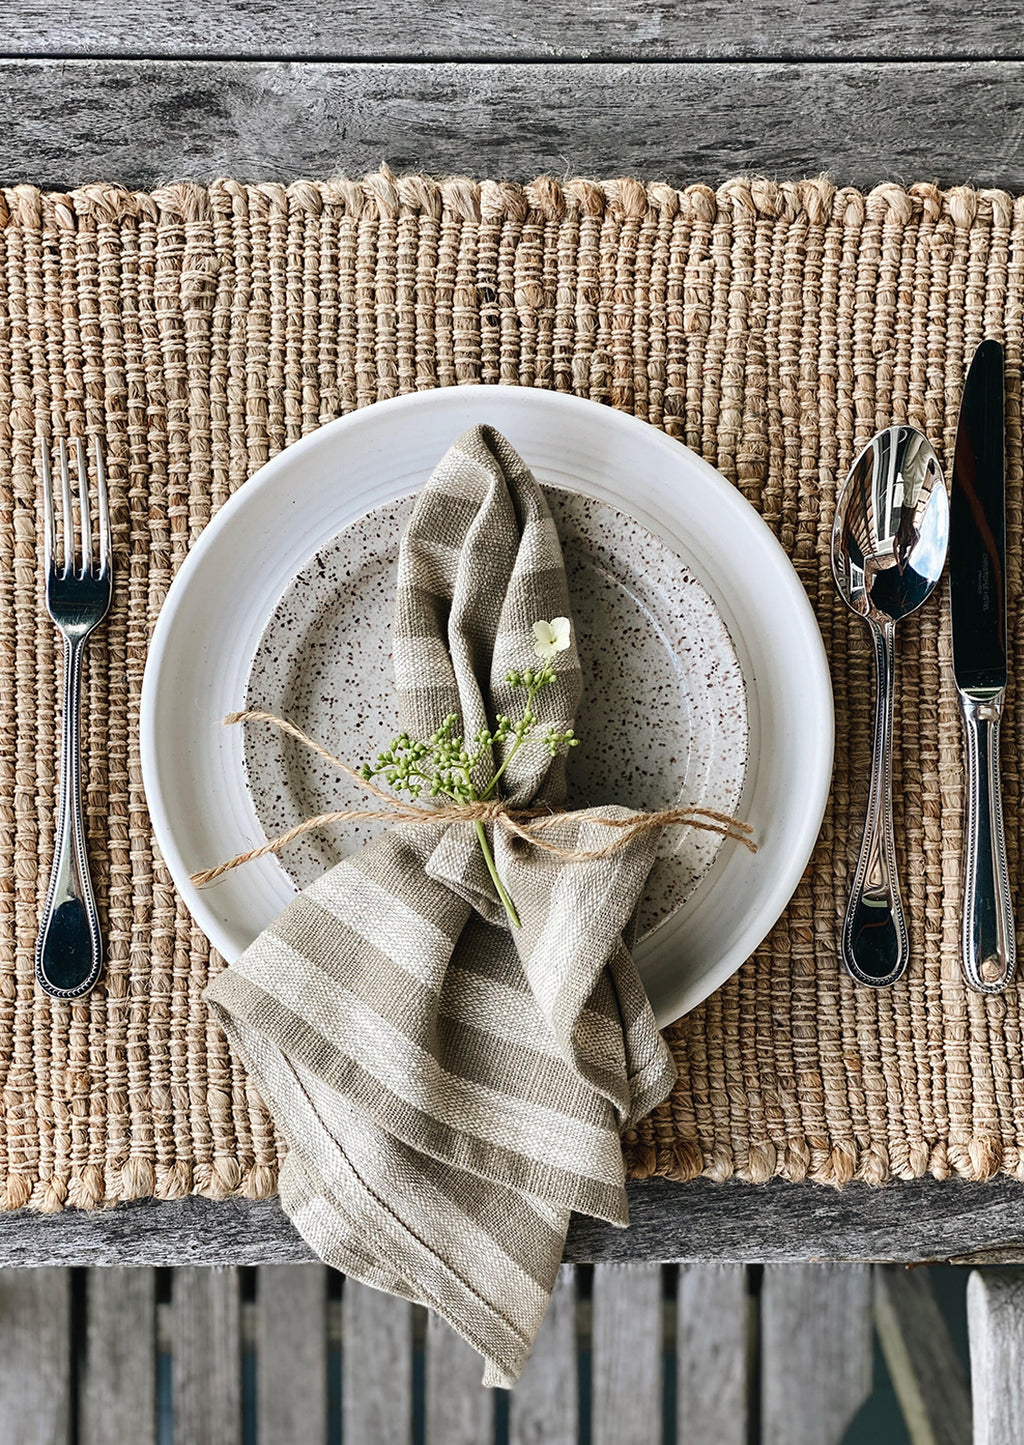 3: A jute placemat with tableware setting.